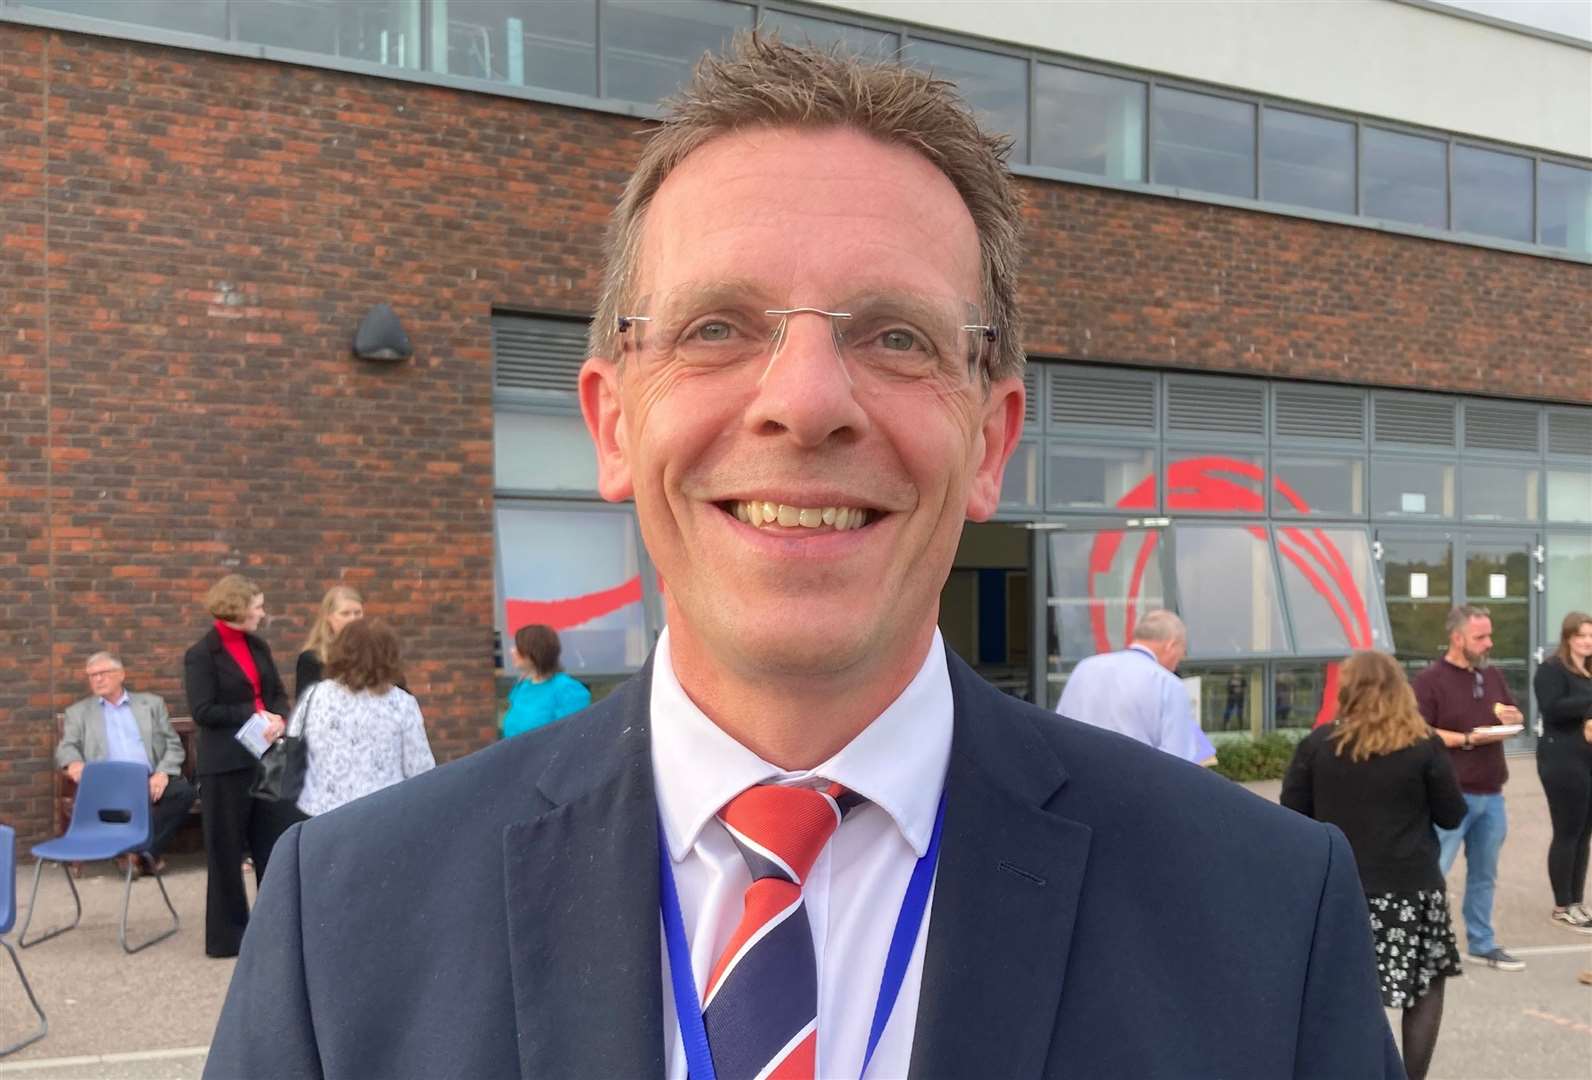 Andy Booth took over from Tina Lee as the full-time head of Oasis Isle of Sheppey Academy in January